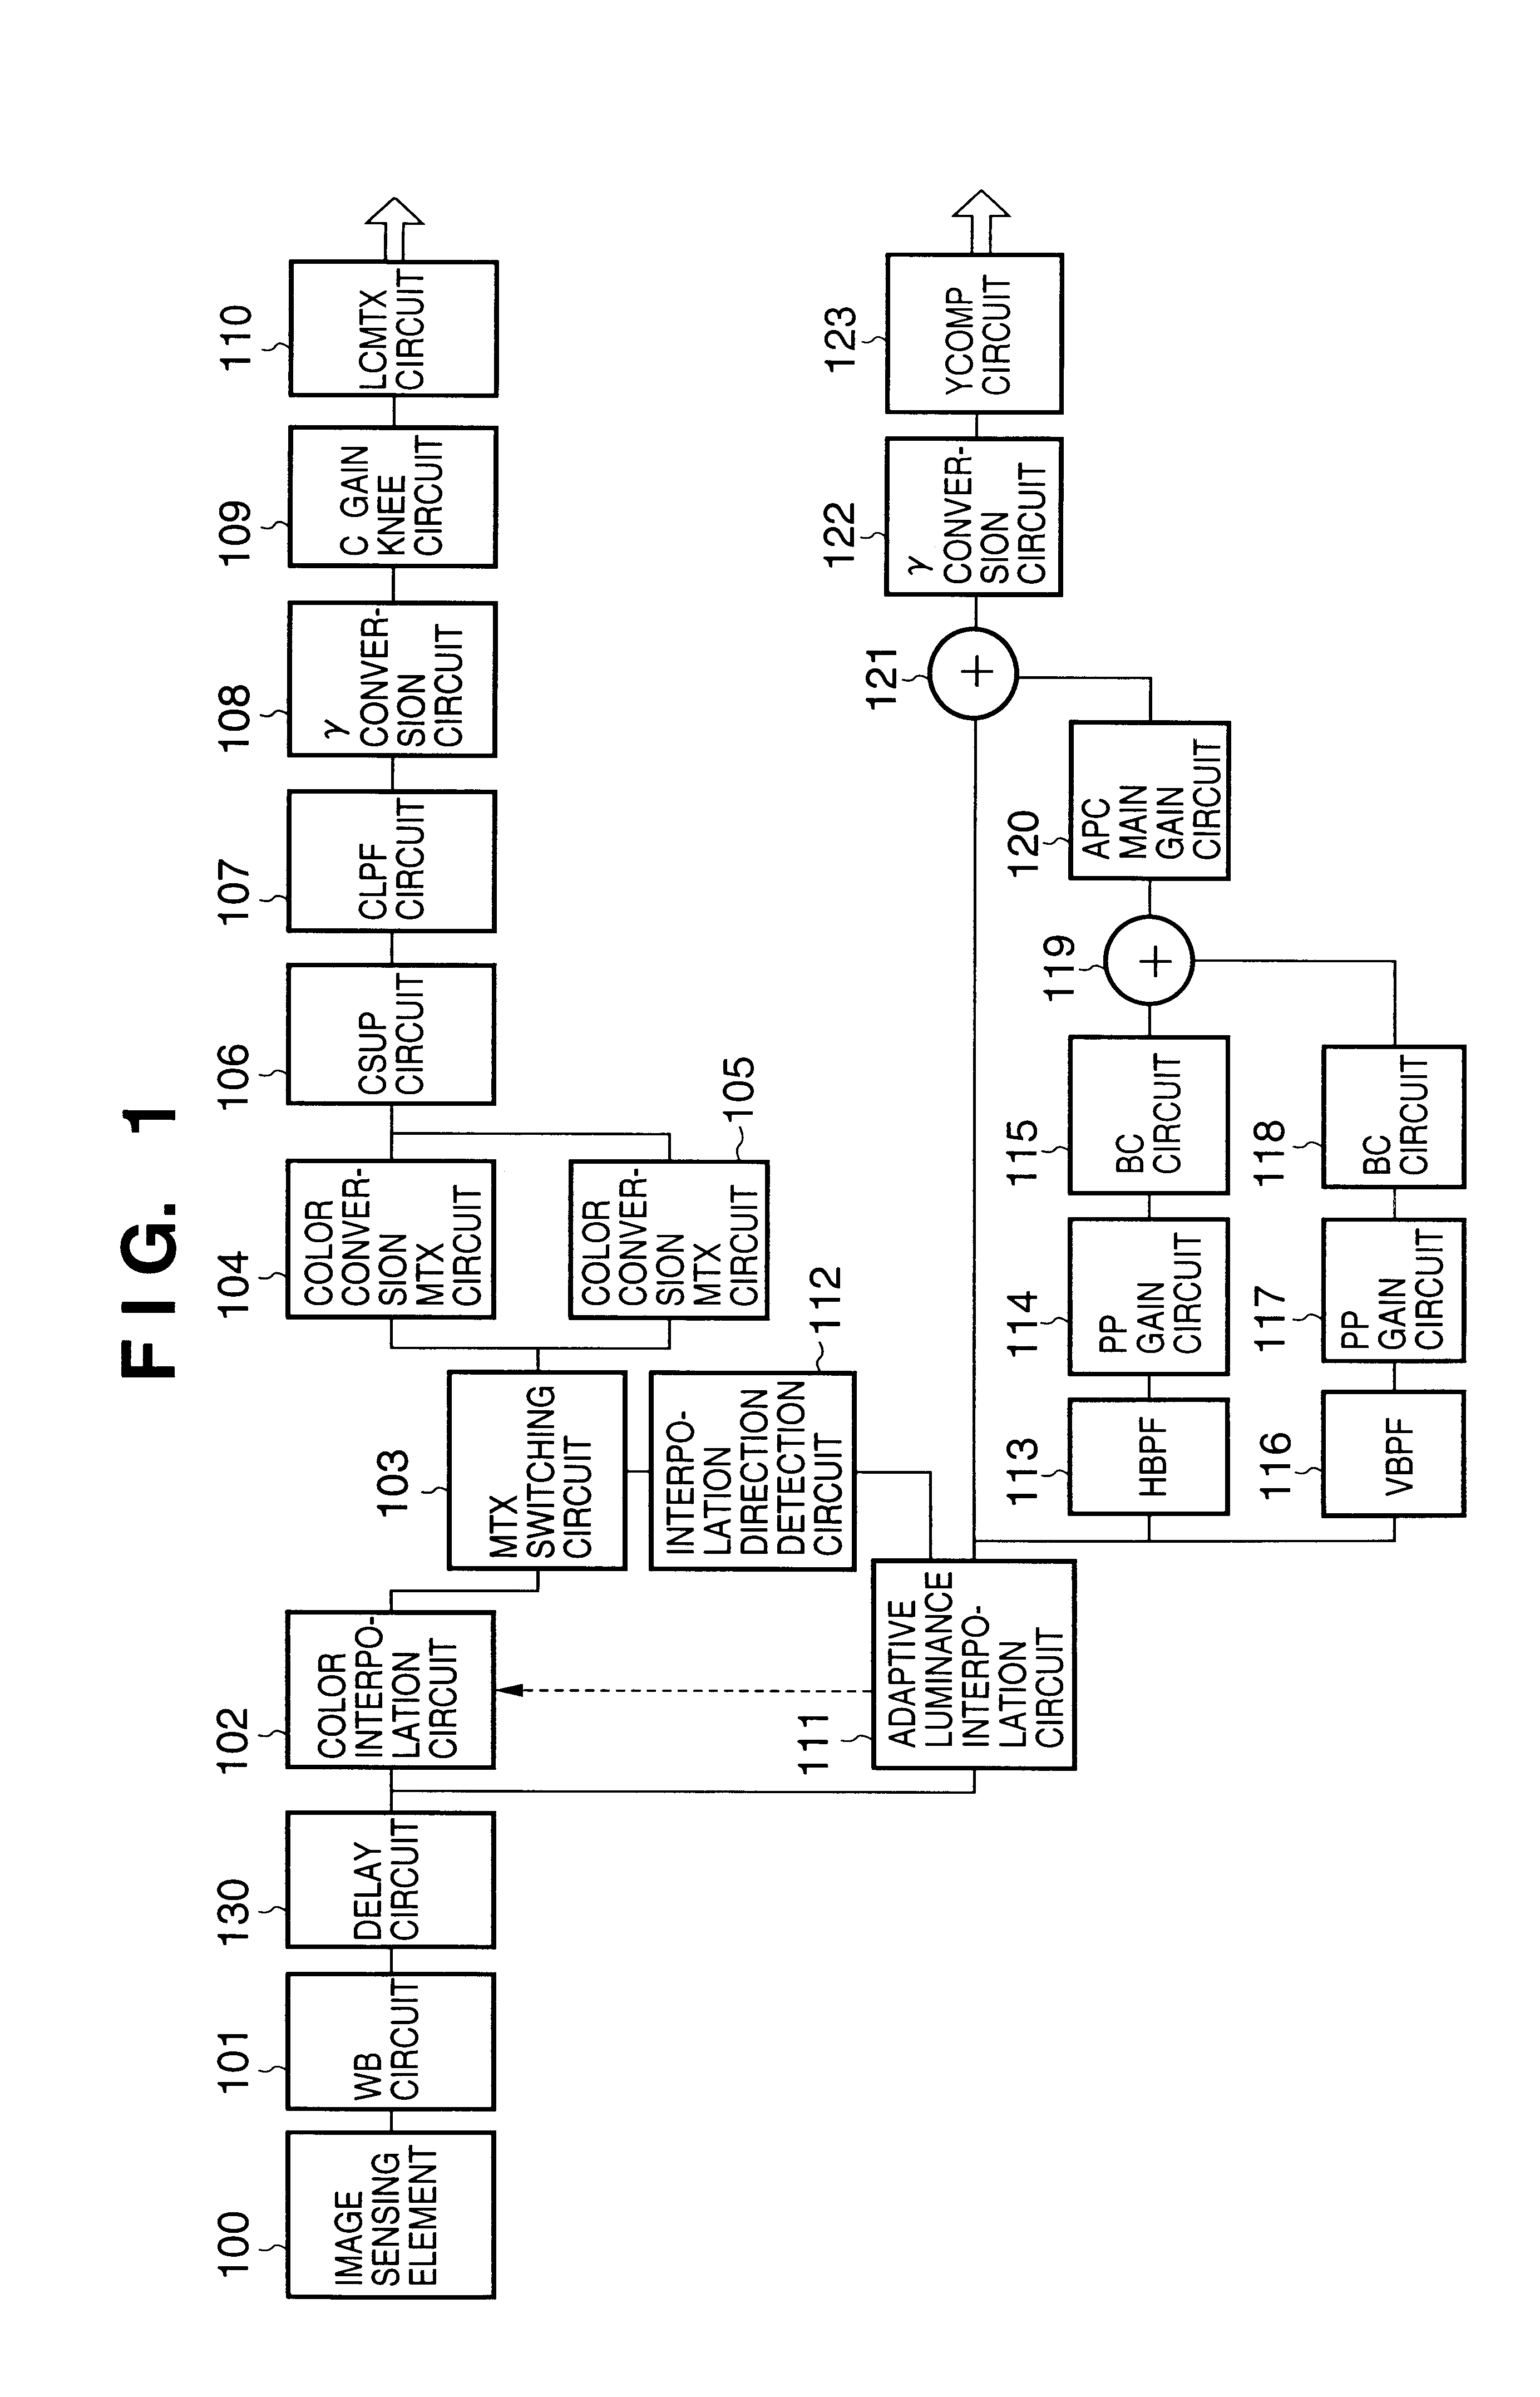 Signal processing apparatus and method for reducing generation of false color by adaptive luminance interpolation